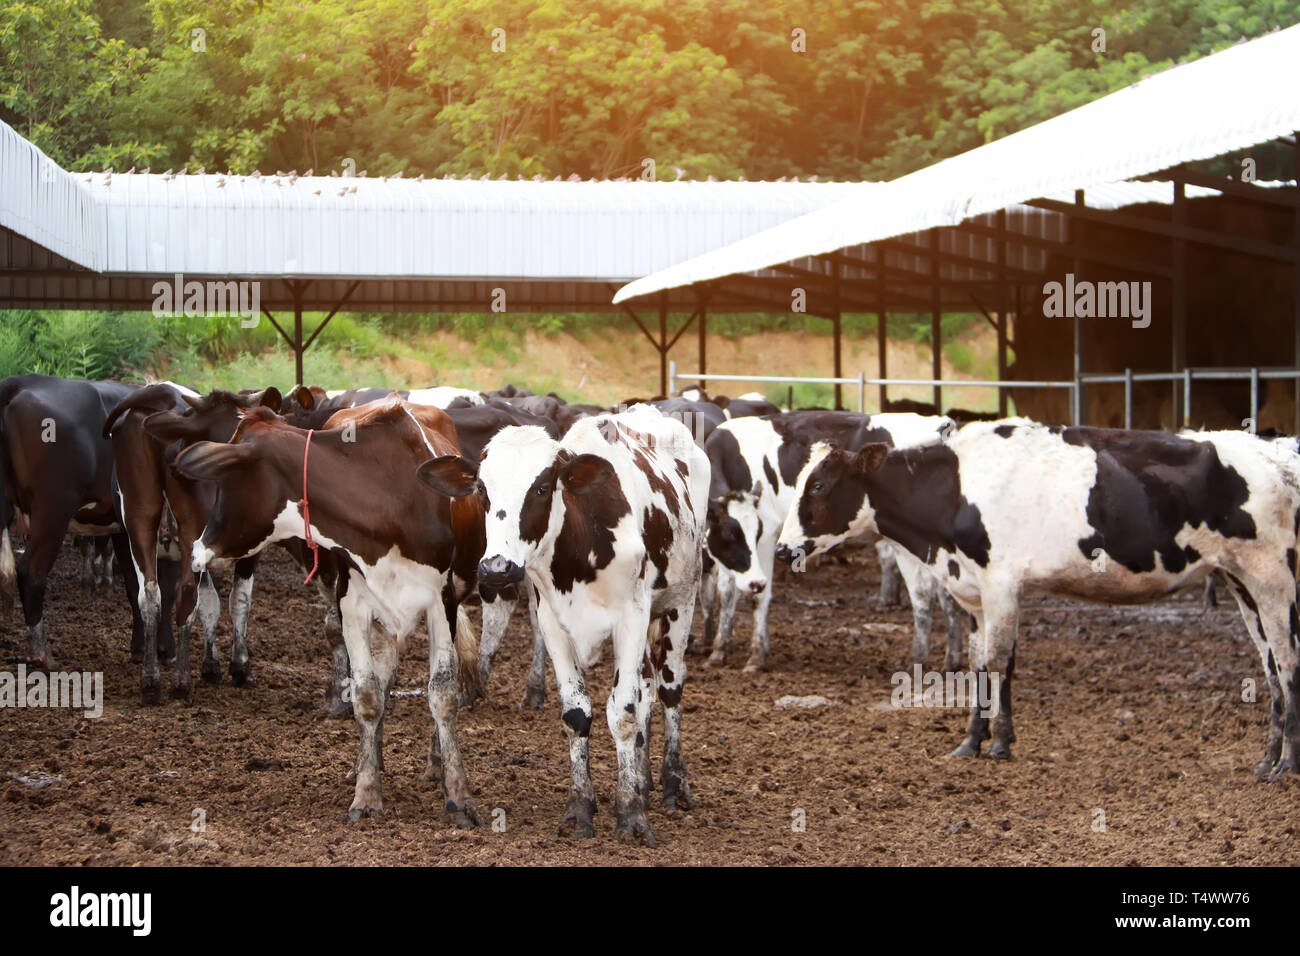 agriculture industry, farming and animal husbandry herd of cows on farm Stock Photo